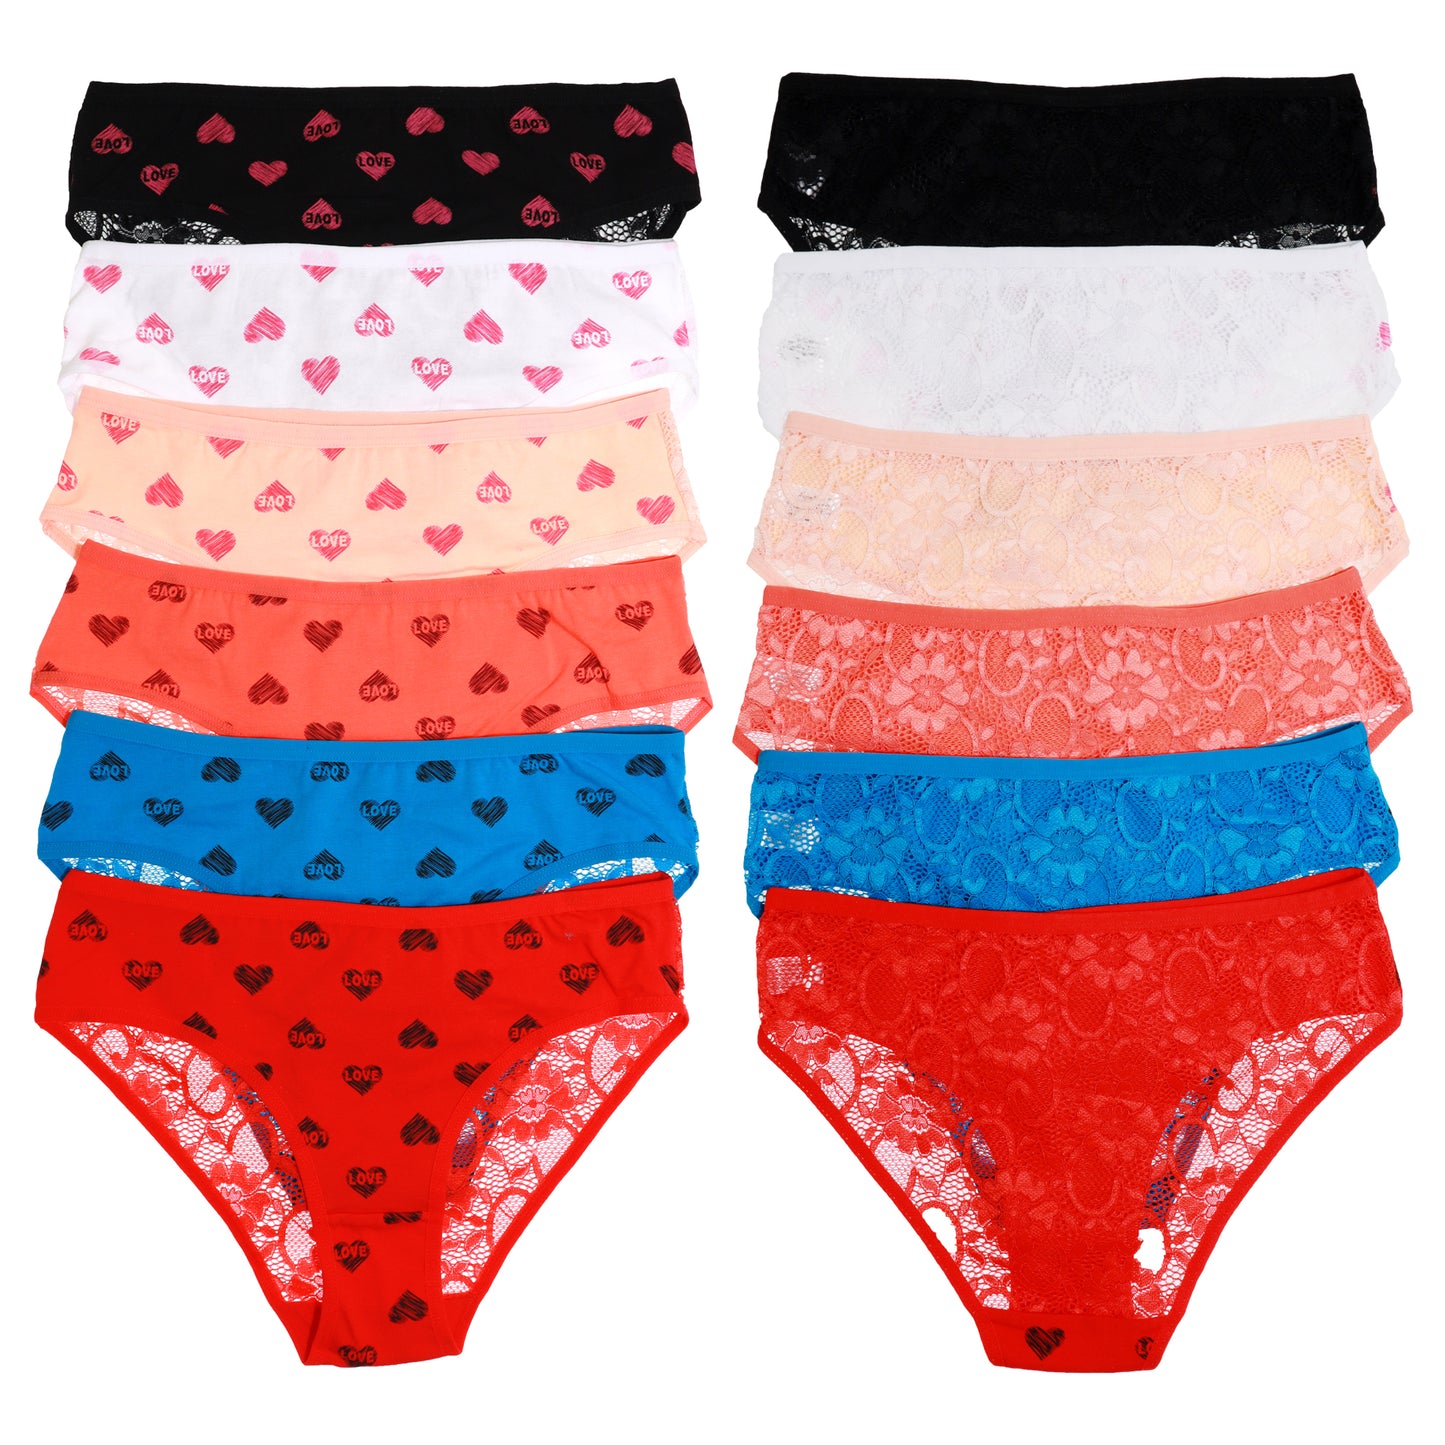 Cotton Bikini Panties with Heart Prints and Floral Lace Back (6-Pack)